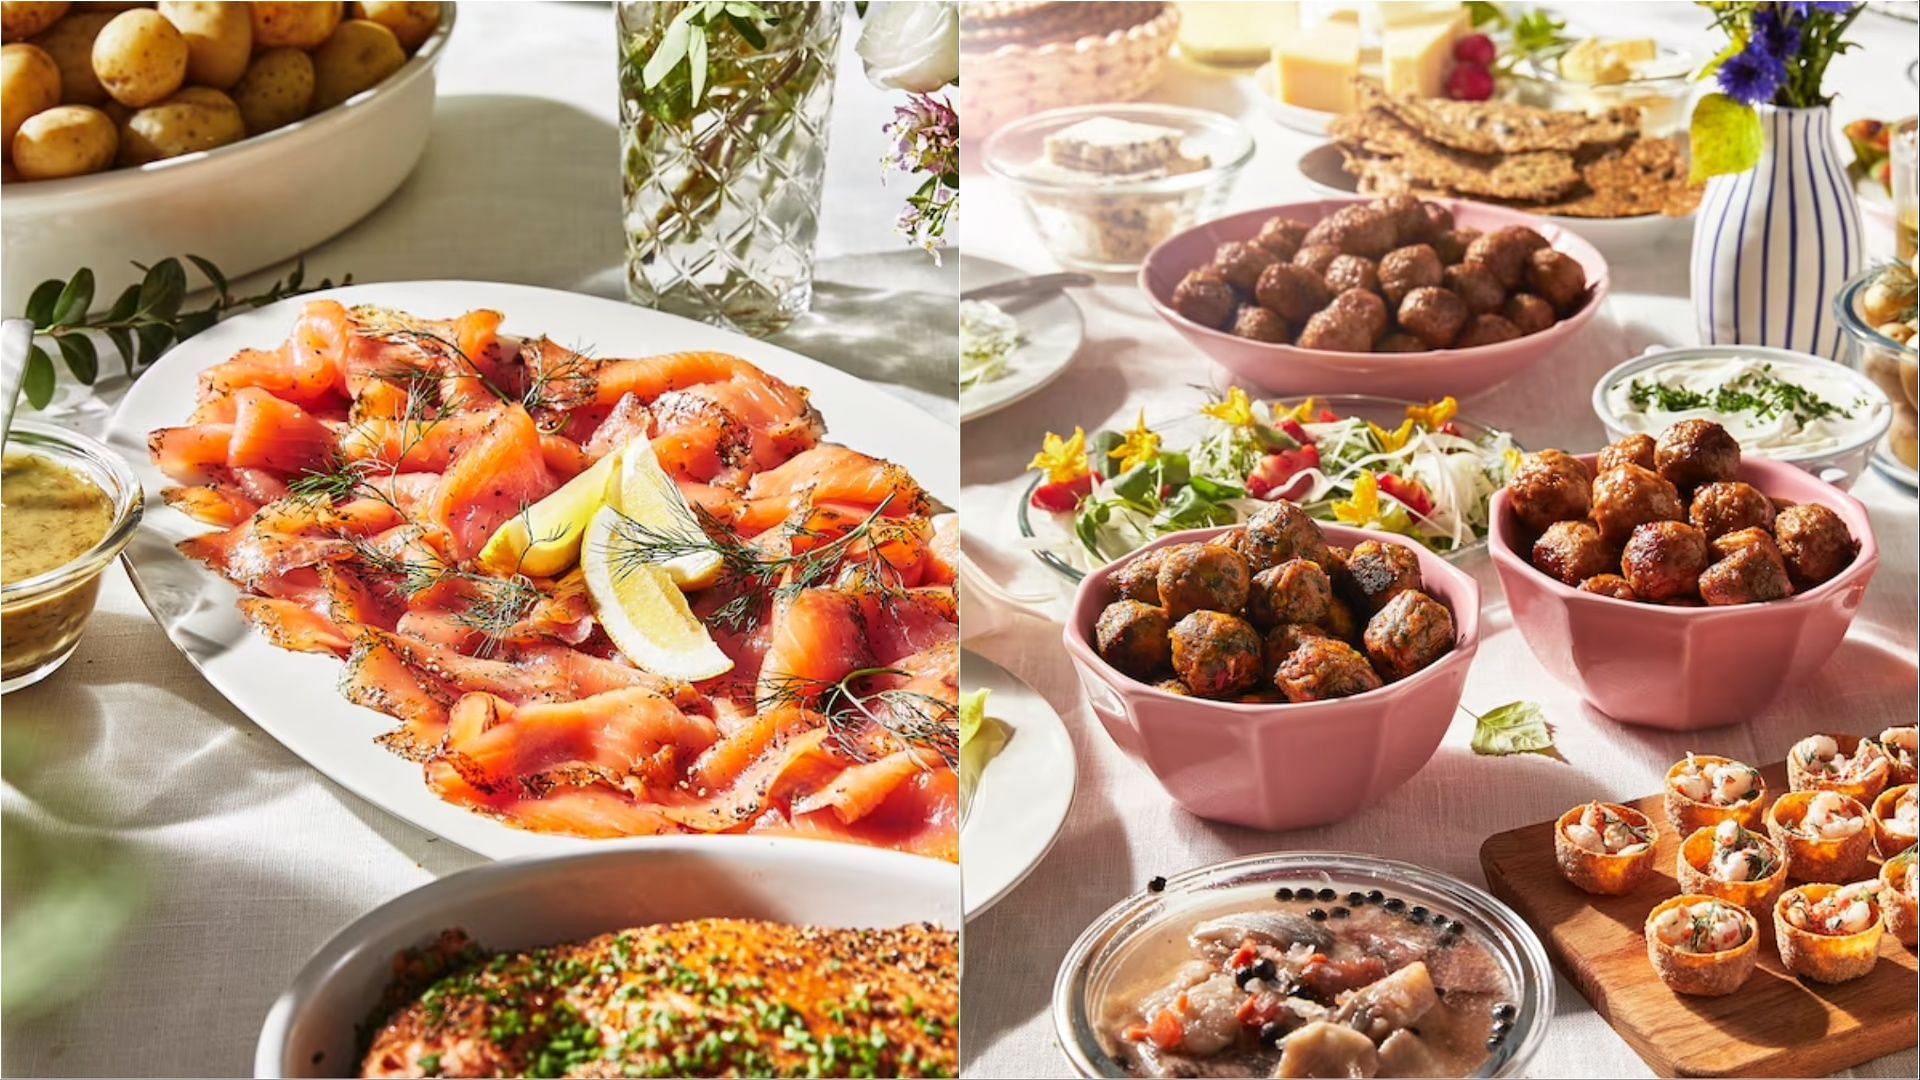 Guests at the Midsummer Buffet 2023 will get to enjoy Swedish meatballs, Salmon, and other traditional treats (Image via IKEA)